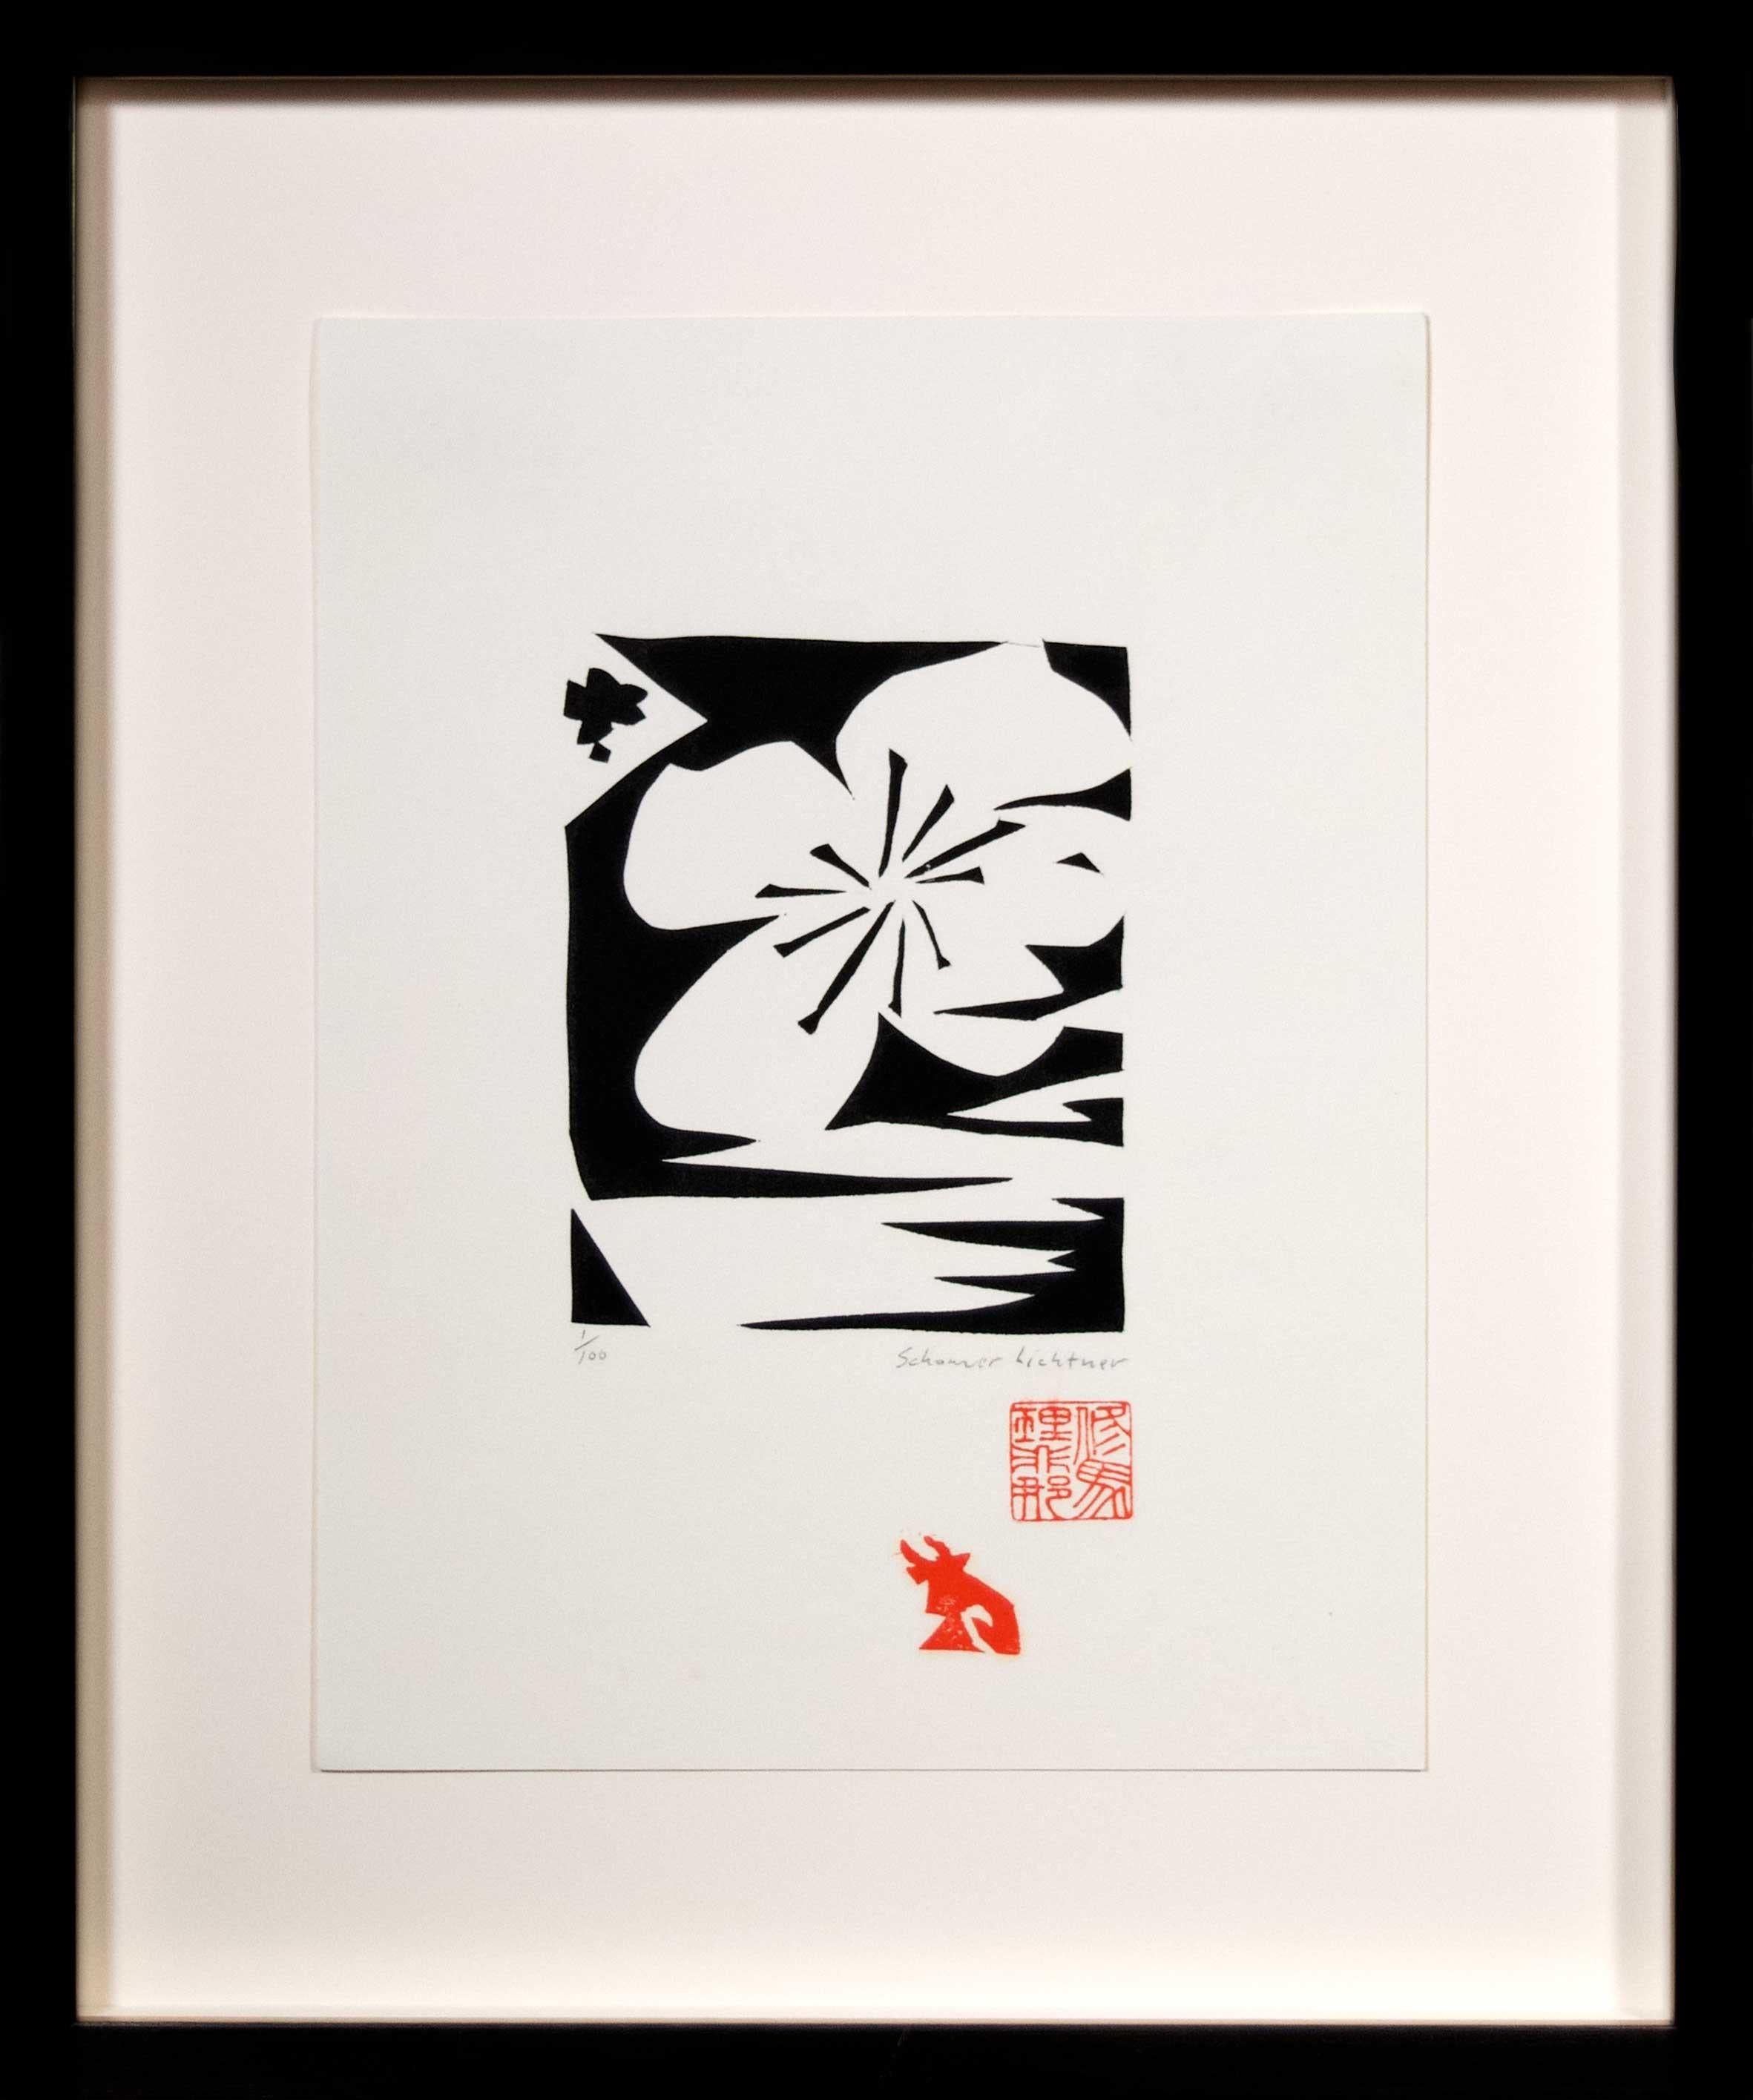 'Flower' is an original linocut by Wisconsin-based artist Schomer Lichtner. The composition presents a five-petaled flower amonst abstracted shadows and forms, rendered with Lichtner's quintessential abstract sensibilities. This print is one from a